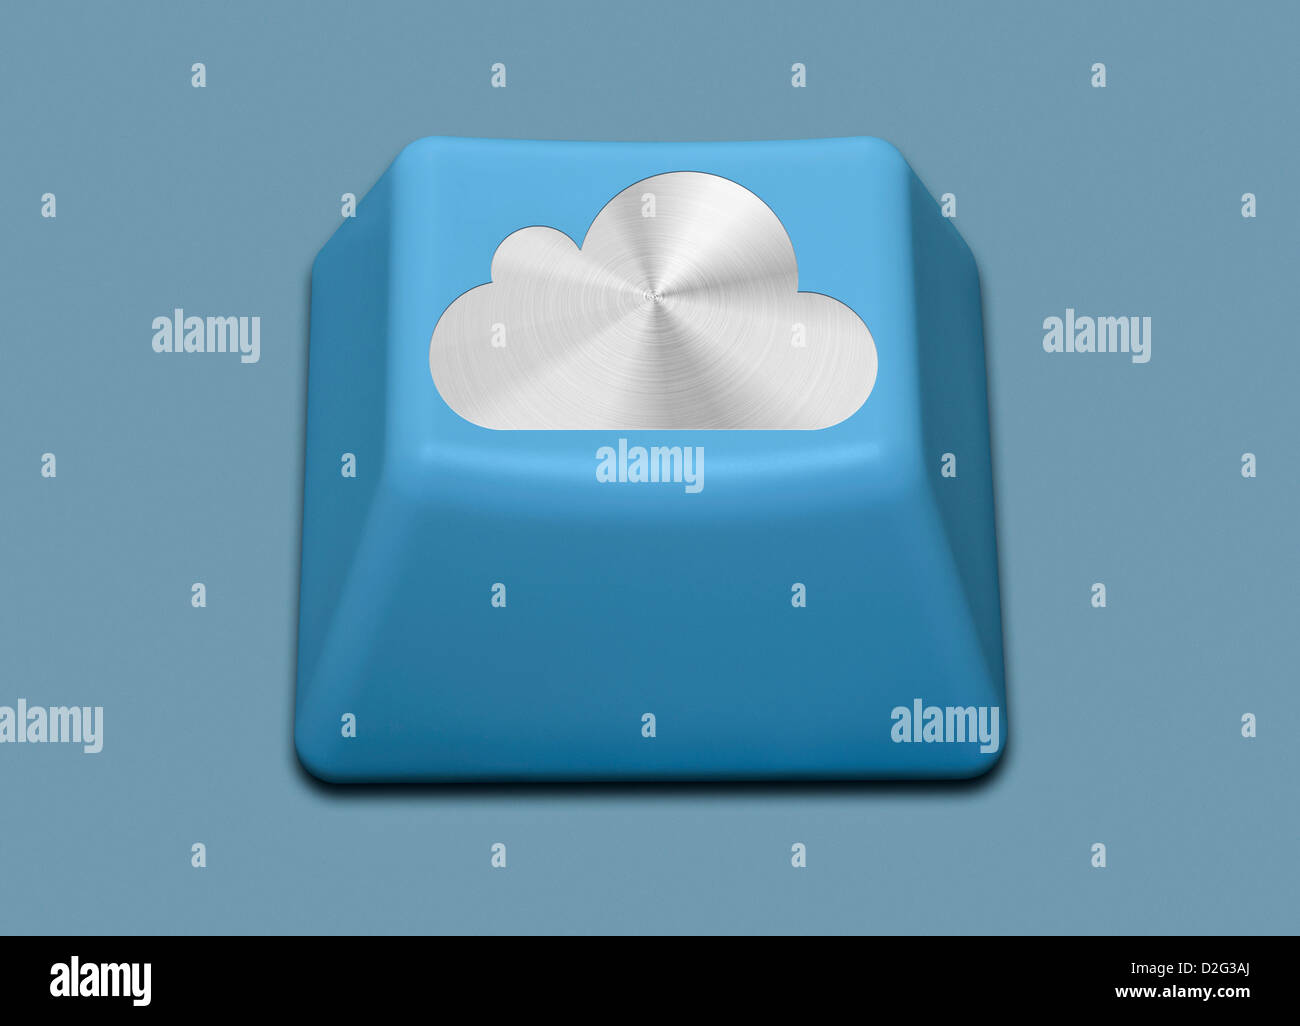 Isolated computer key with iCloud logo on it - cloud computing concept Stock Photo